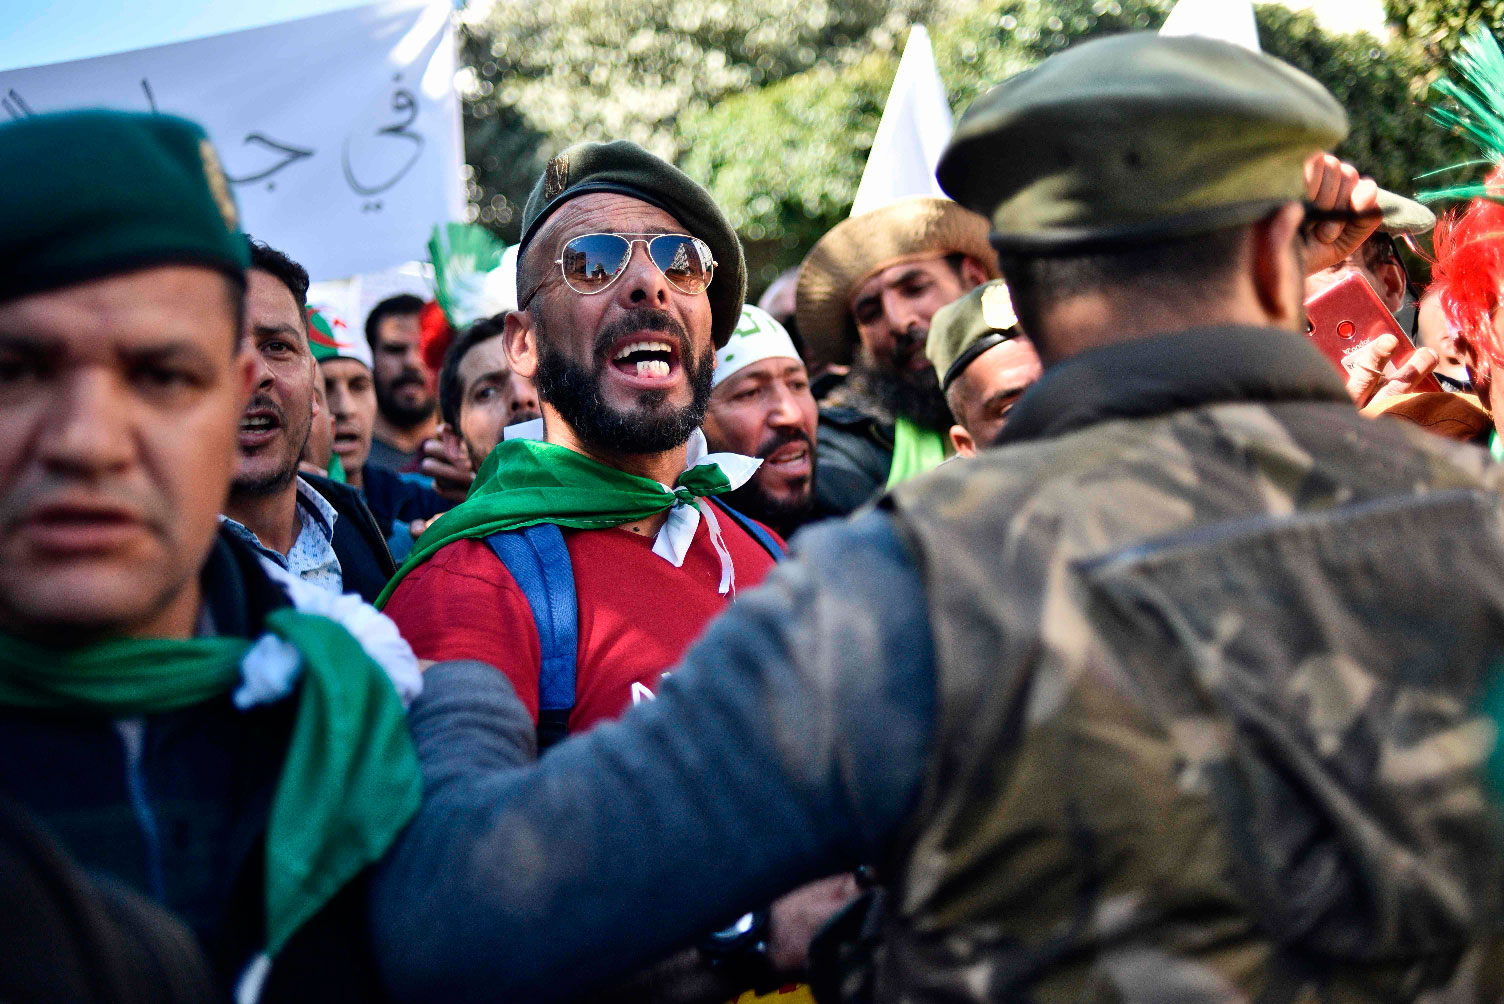 Veteran soldiers from Algeria's civil war take part in a demonstration against ailing President Abdelaziz Bouteflika in the capital Algiers on March 29, 2019.